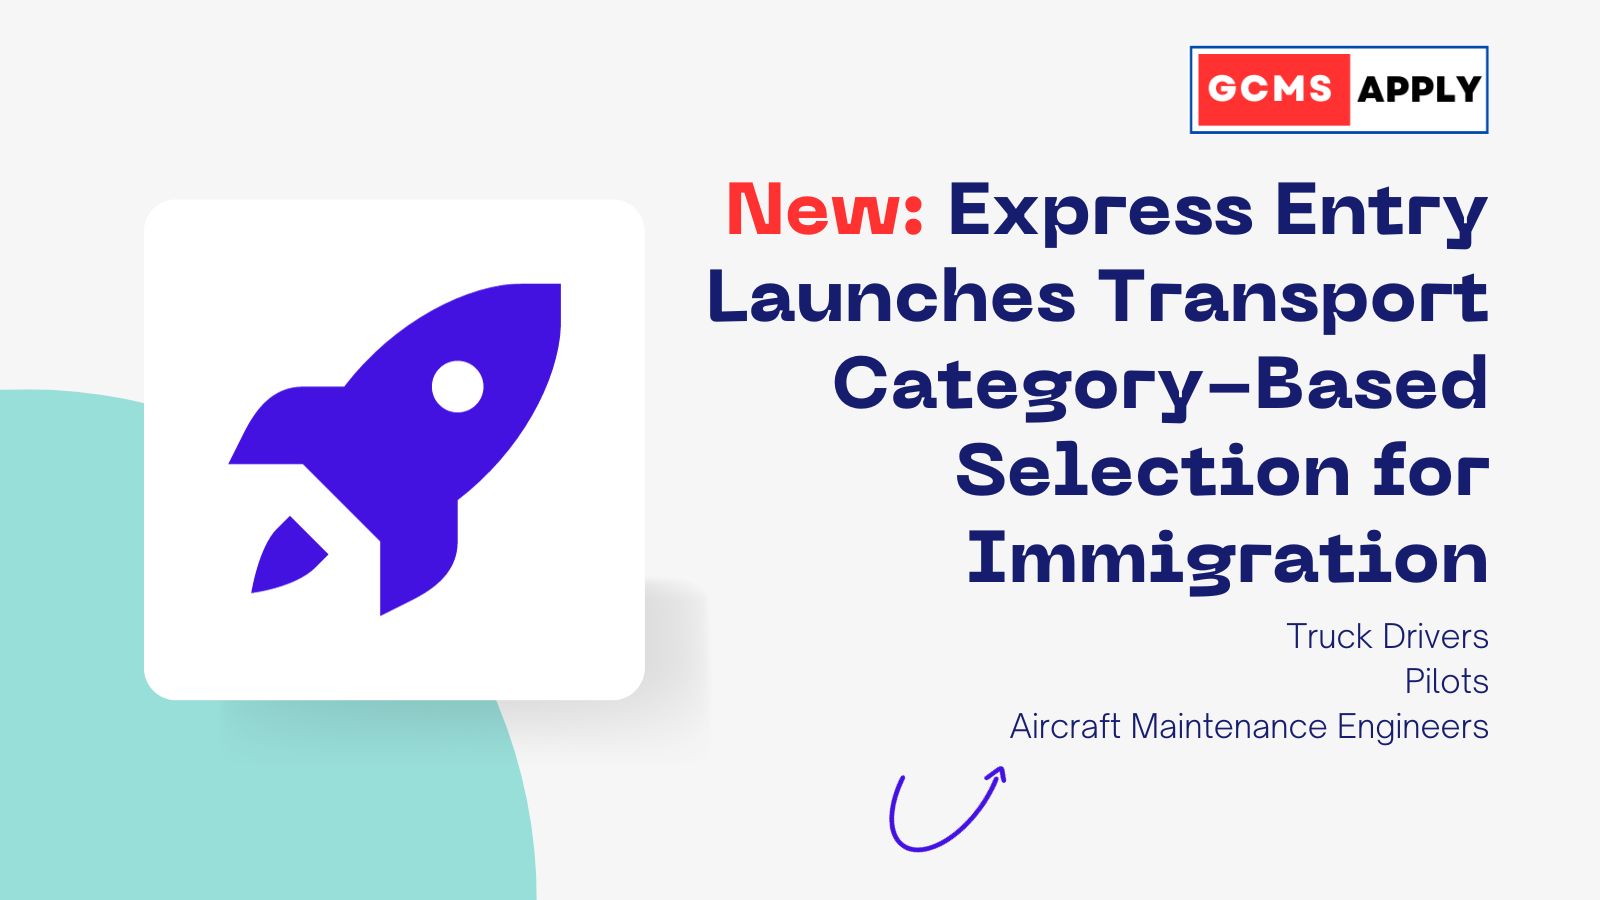 New Express Entry Launches Transport Category-Based Selection for Immigration